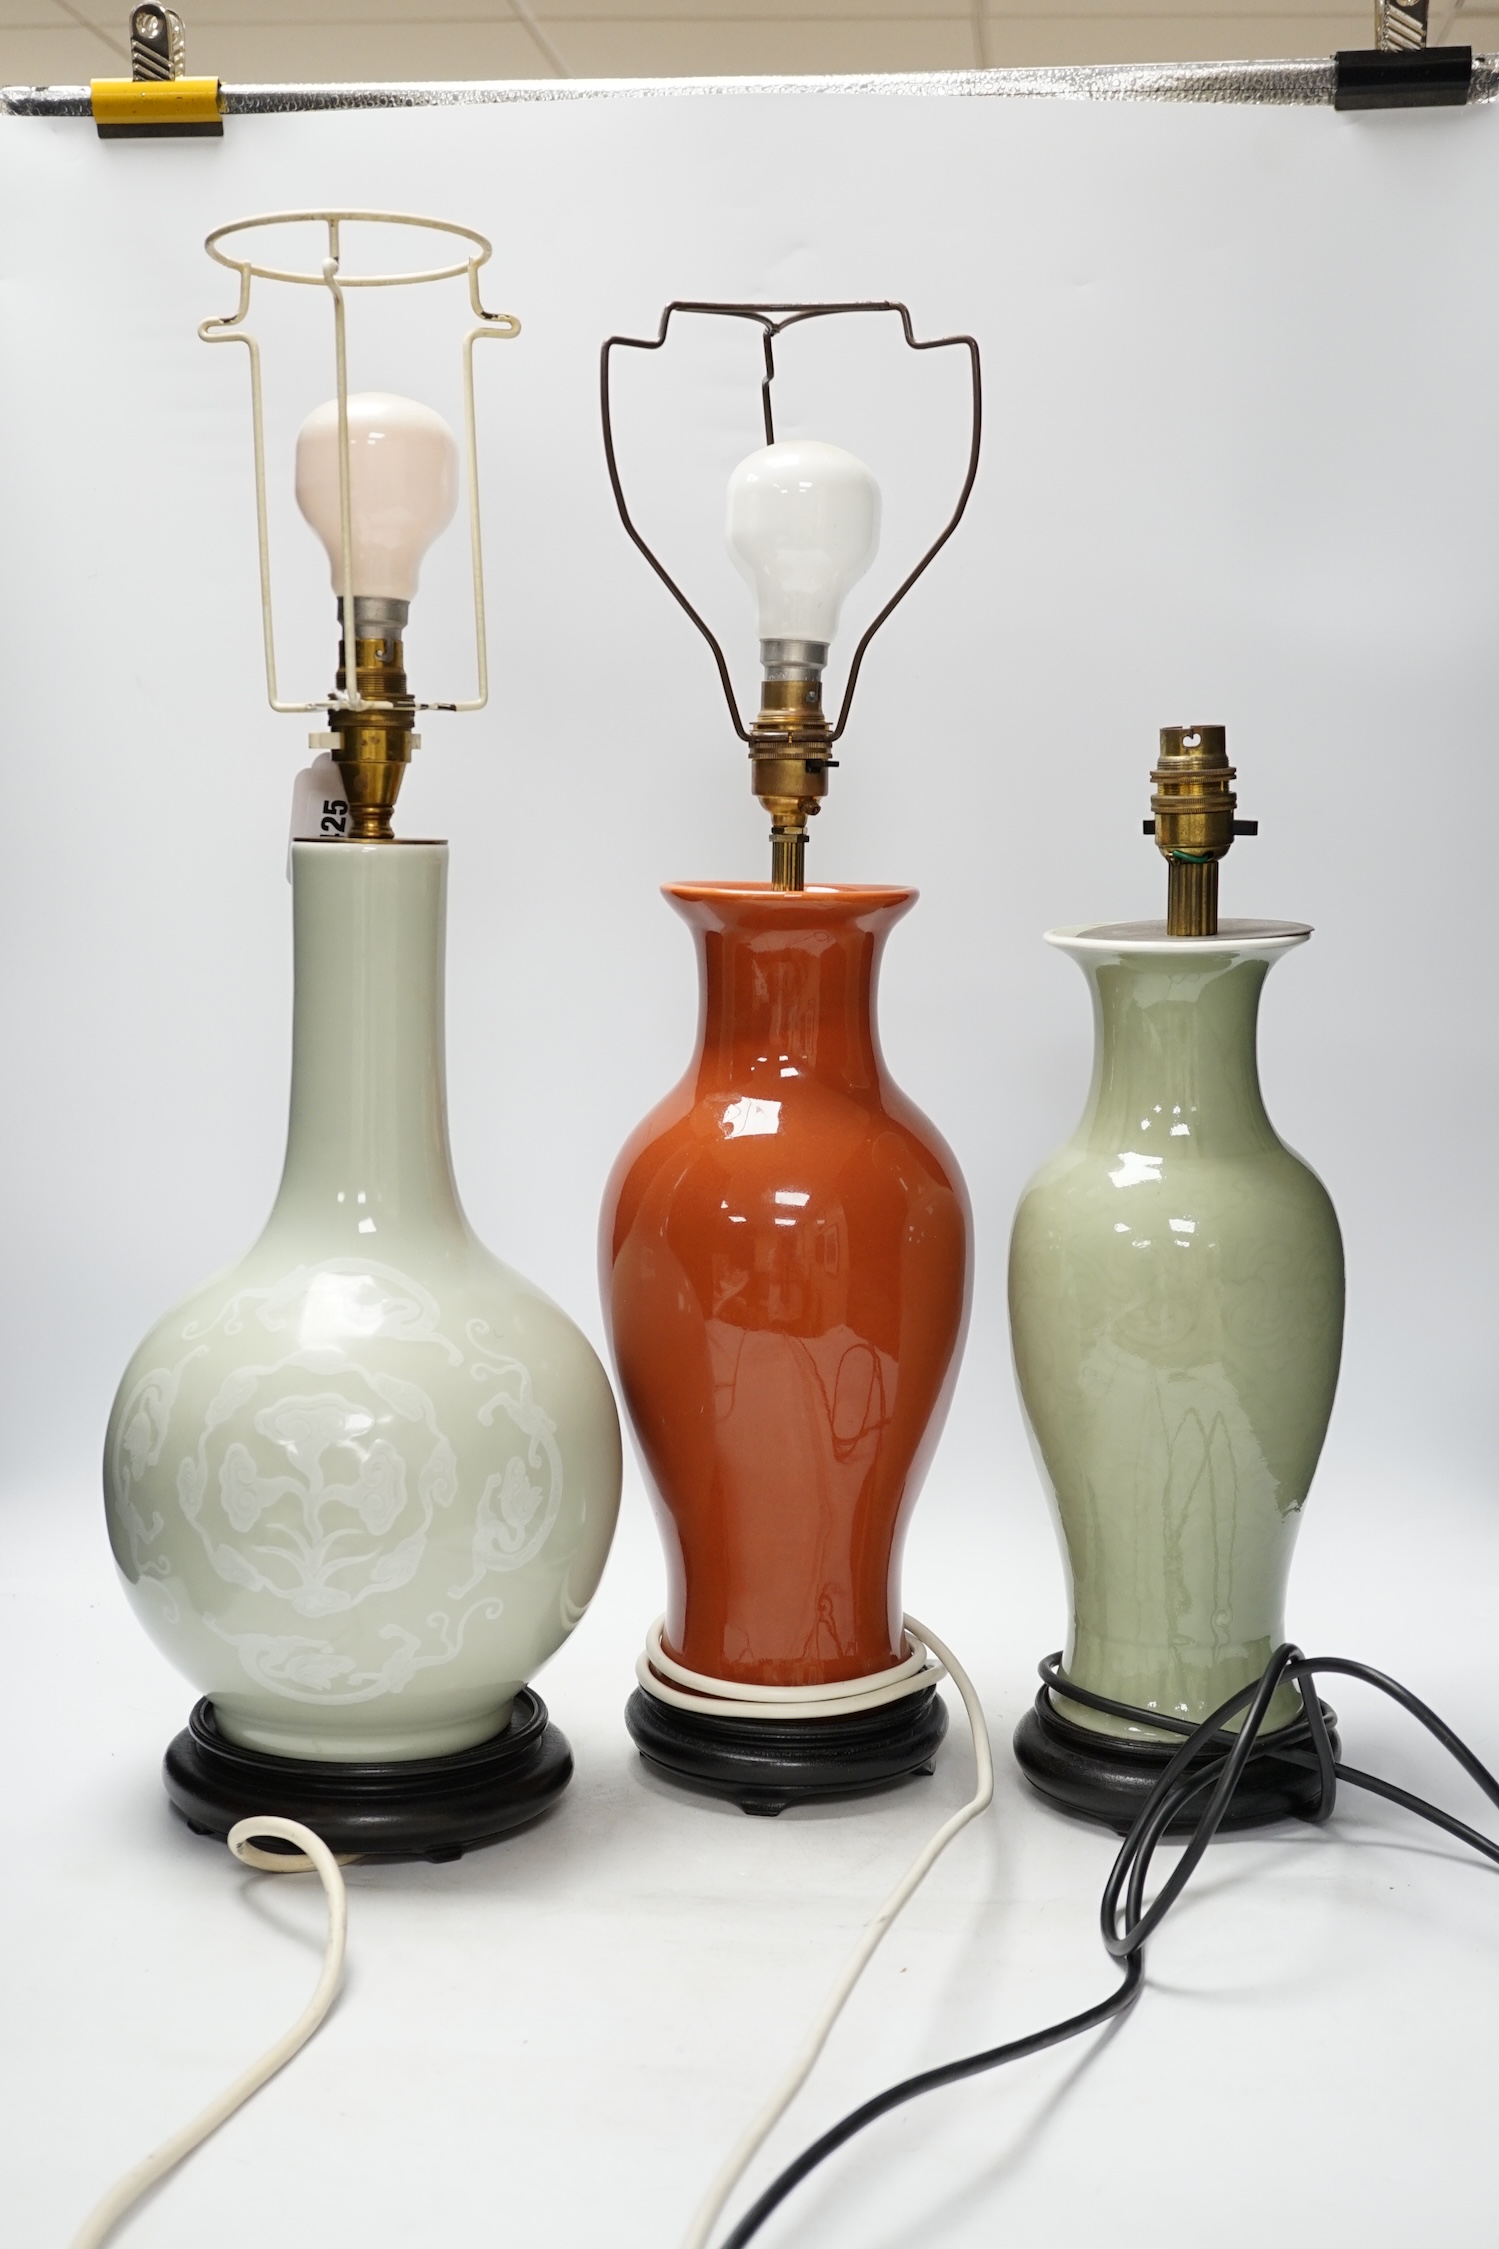 Three Chinese monochrome porcelain lamp bases, 20th century, tallest 38cm high - Image 2 of 5